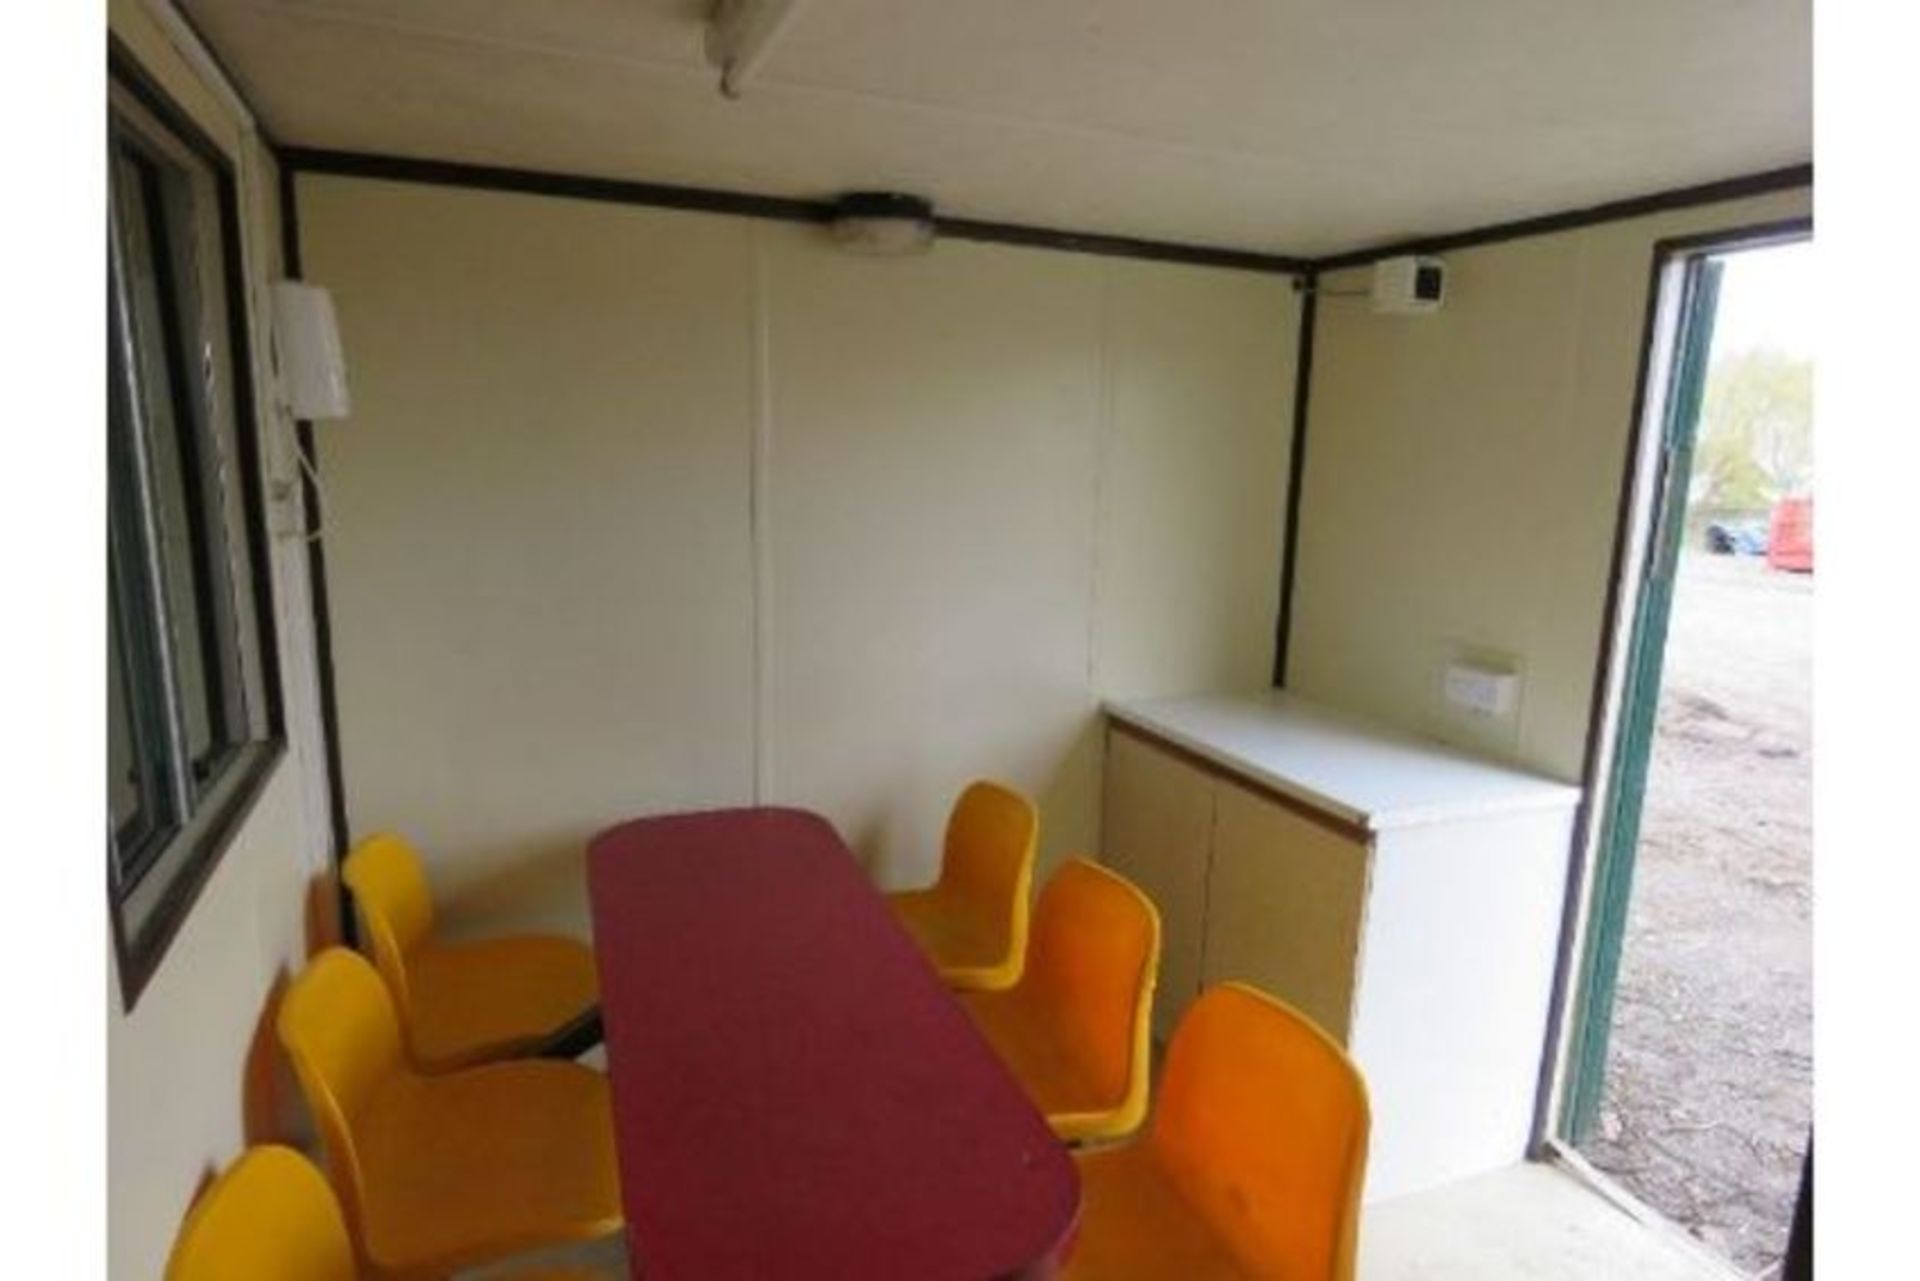 PORTABLE SITE OFFICE / SECURE SITE WELFARE CABIN, 32FT LENGTH X 10FT WIDTH APPROX. ACCOMODATION COM - Image 11 of 21